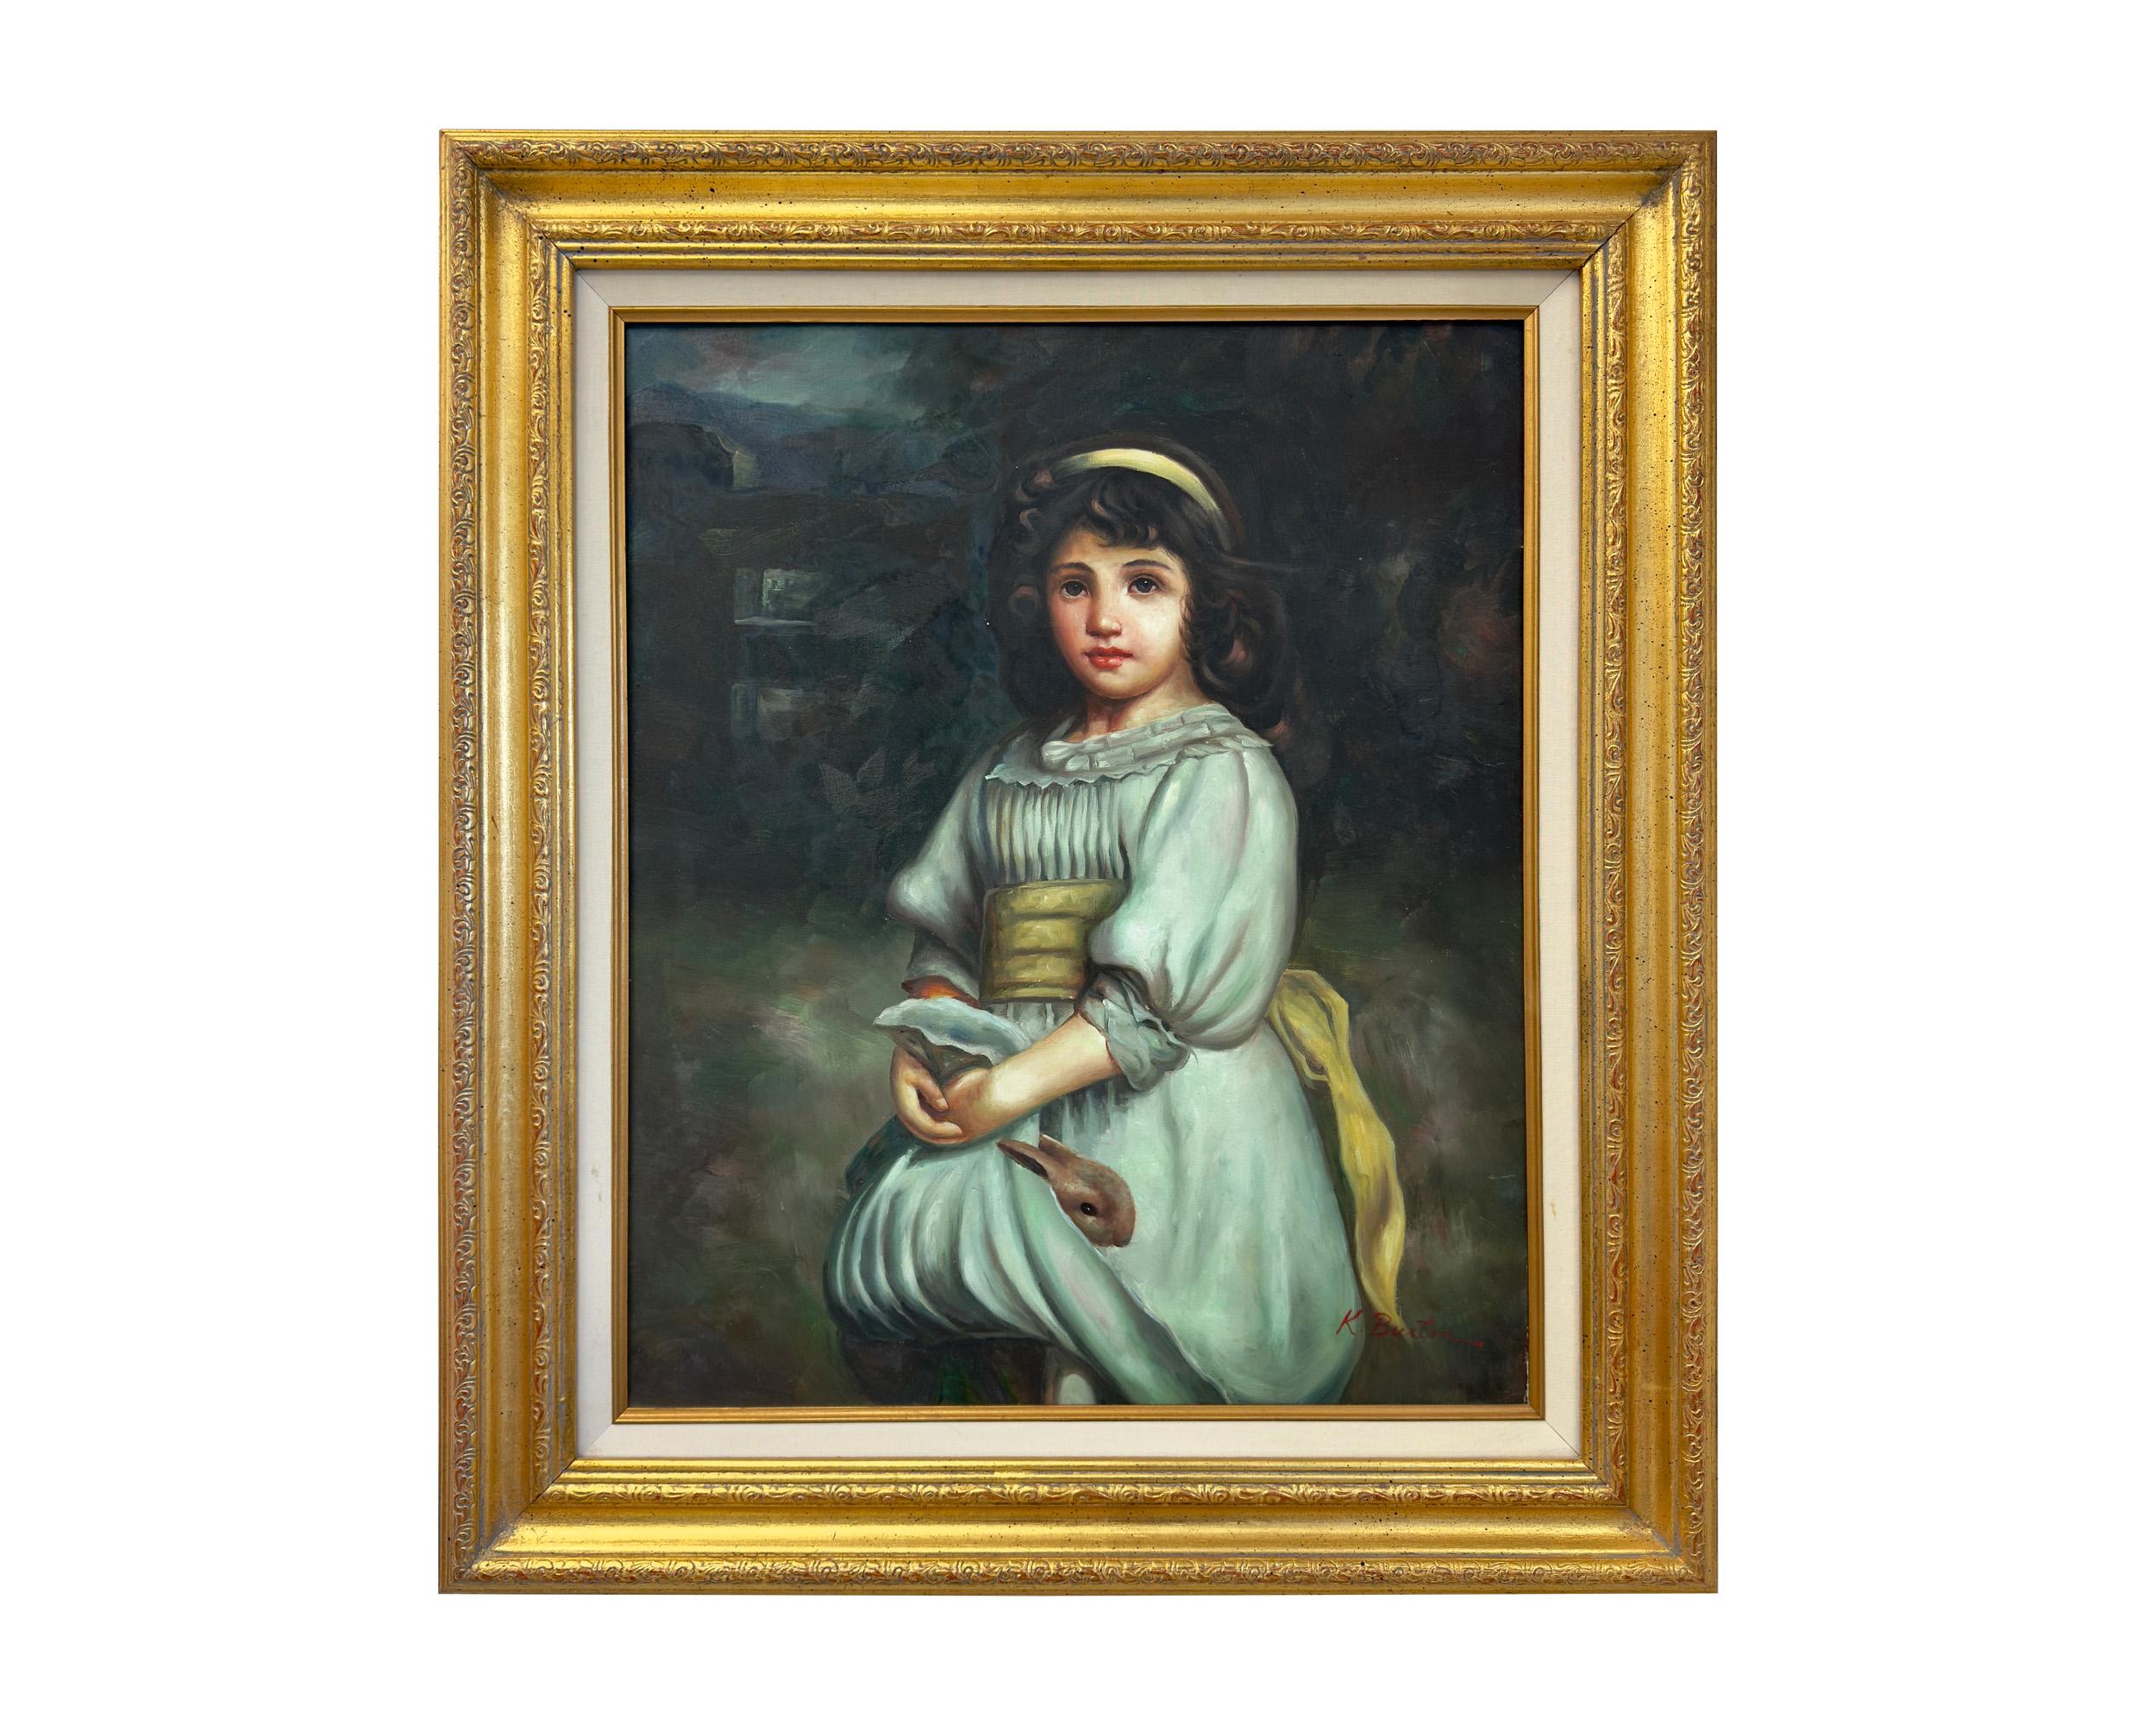 Unknown Portrait Painting - Portrait of a Young Girl Oil on Canvas By K. Burton, Signed and Framed